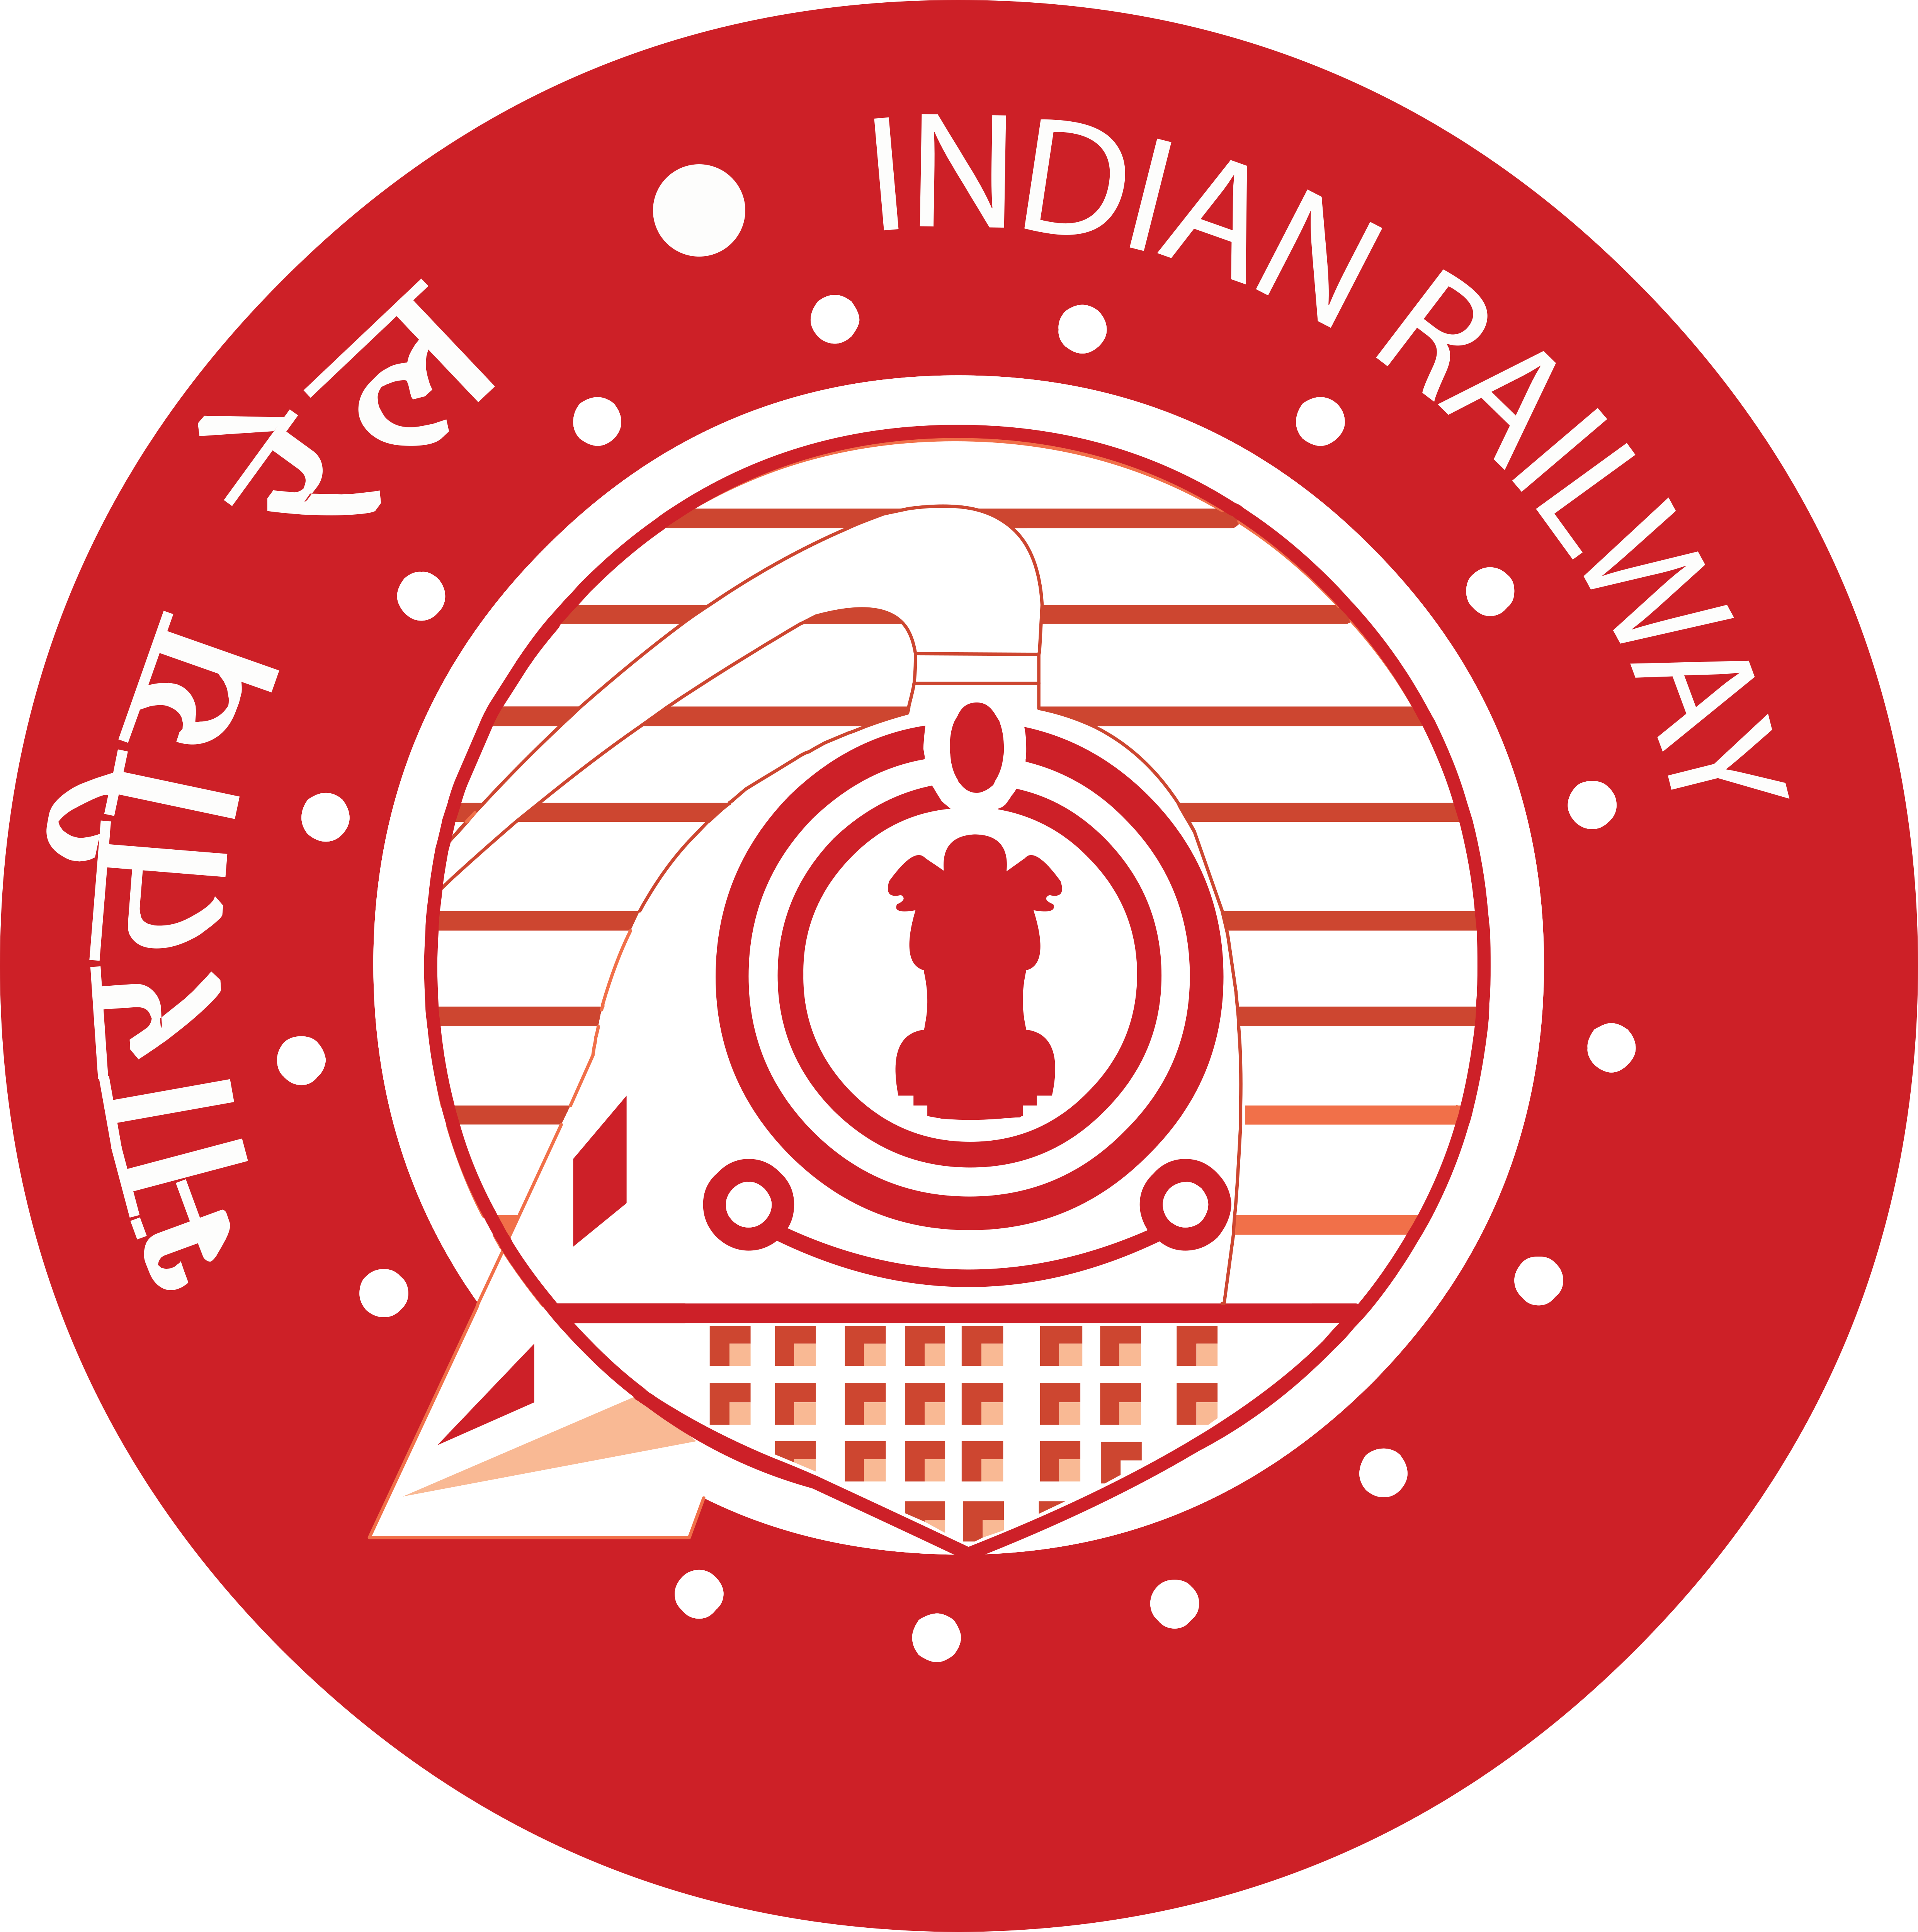 STANDARD SIGNAGES AT STATIONS ON INDIAN RAILWAYS